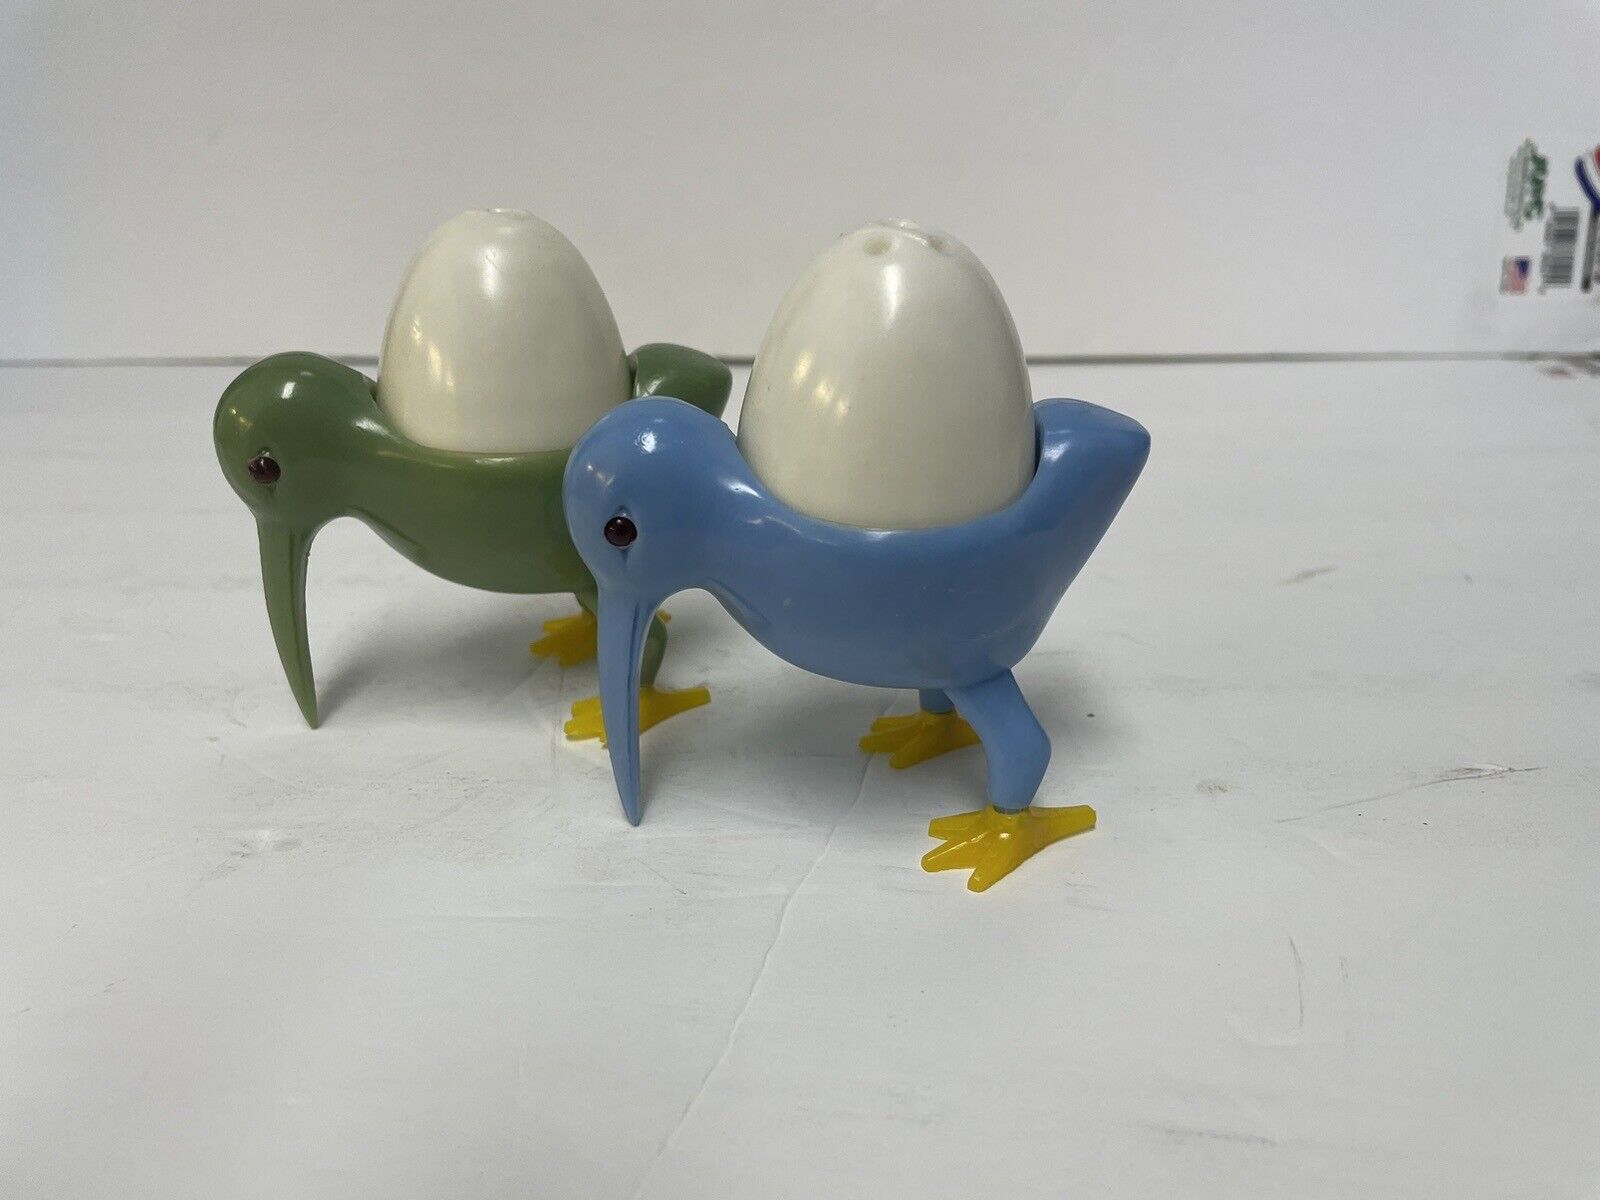 Vintage 1960’s Bird Egg Cup Shakers Sweet Easter Kiwi Birds Spring Table Decor